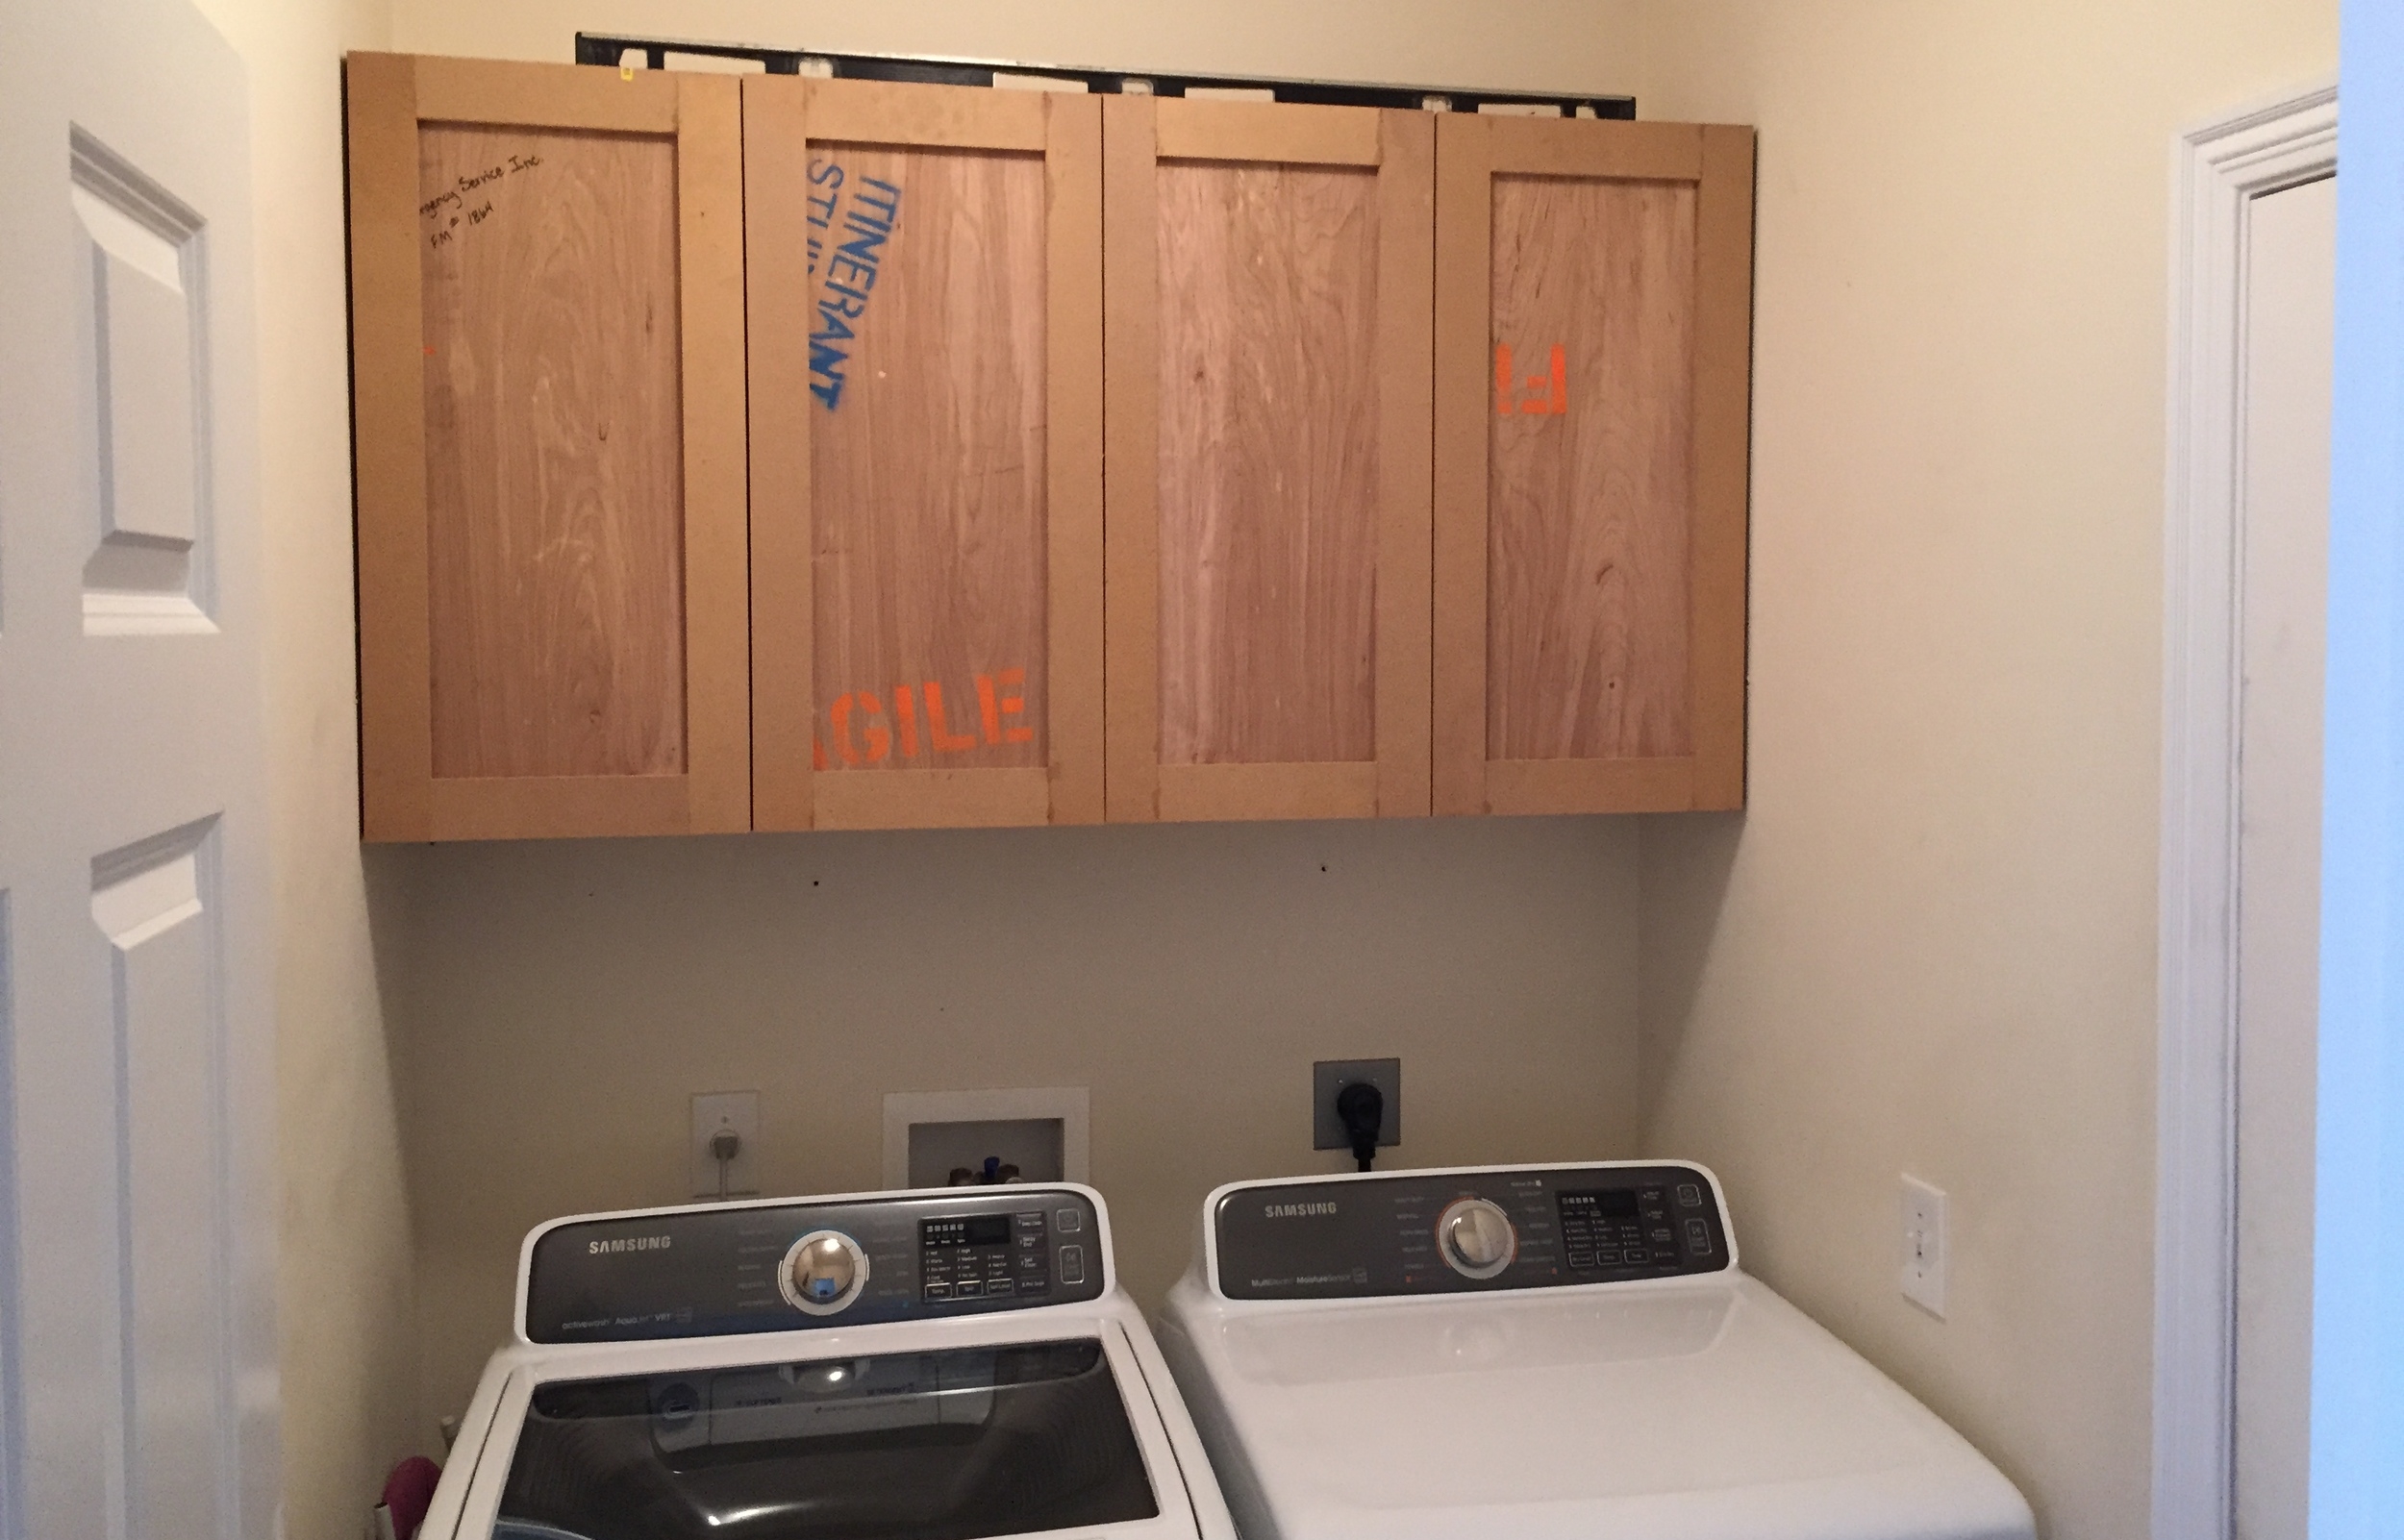 Upper Cabinets Laundry Room Makeover, How Deep Should Laundry Room Cabinets Be Made